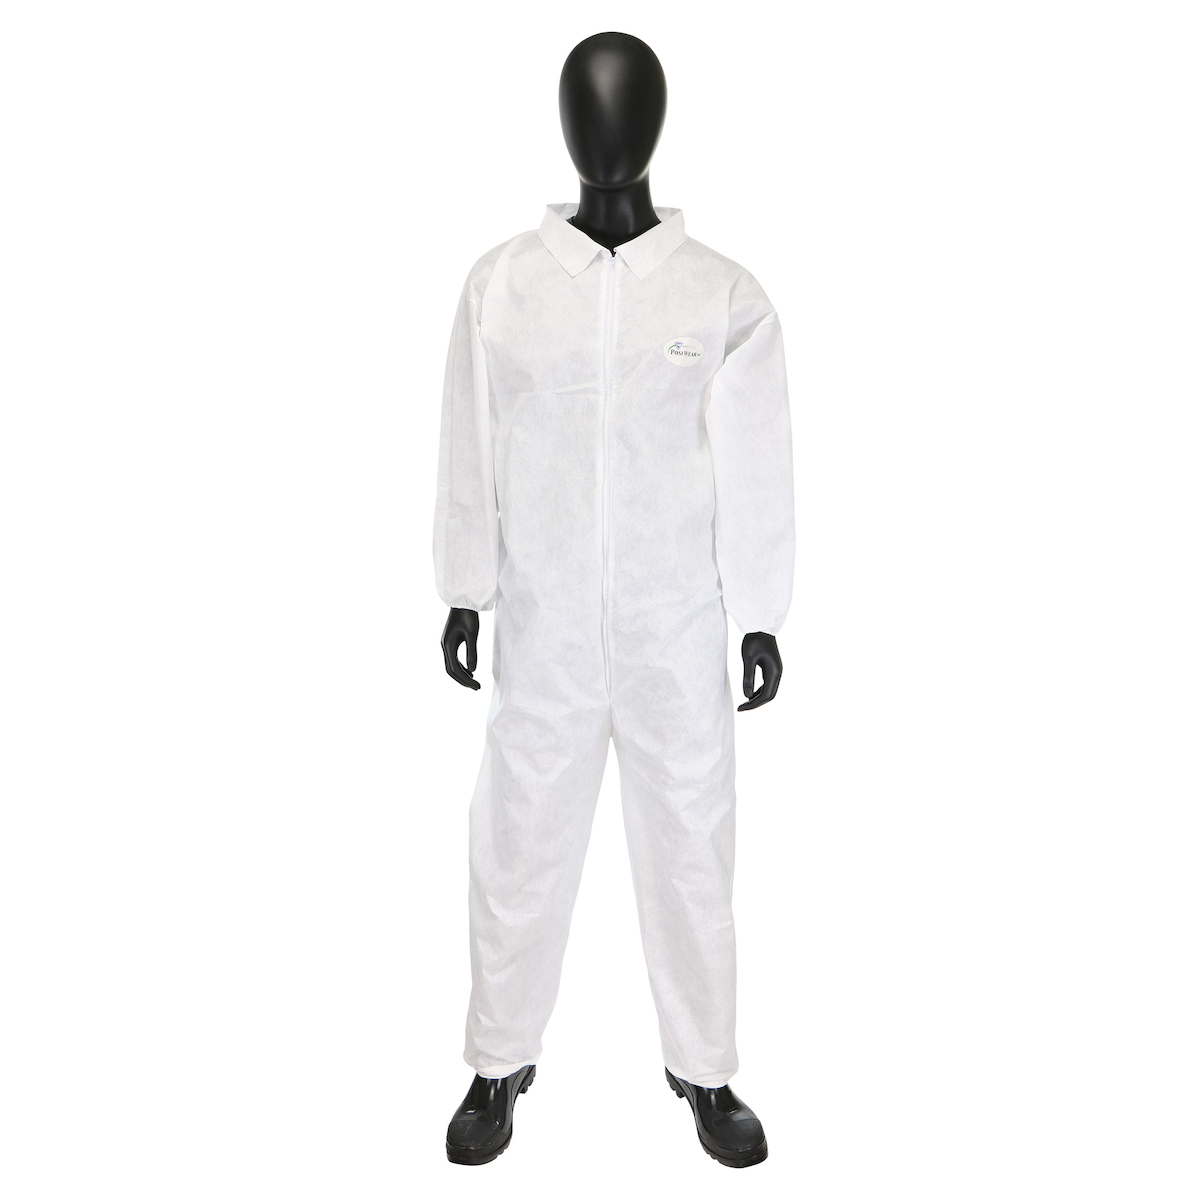 Posi-Wear® M3™ White SMMMS Coverall with Elastic Wrist and Ankle - Disposable Clothing